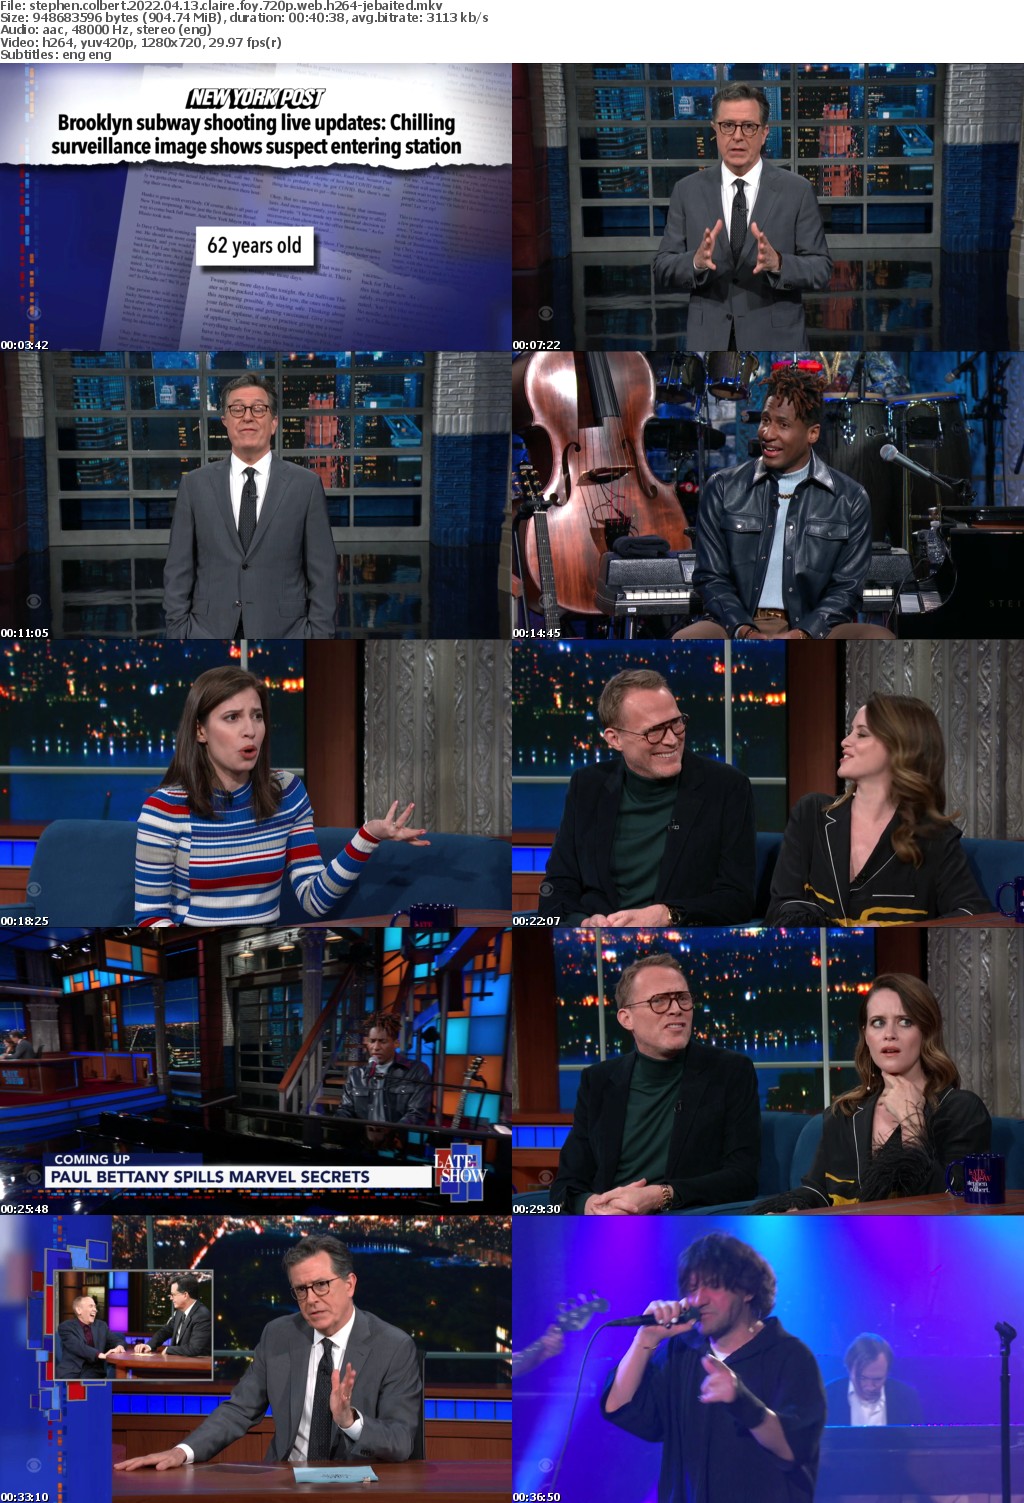 Stephen Colbert 2022 04 13 Claire Foy 720p WEB H264-JEBAITED